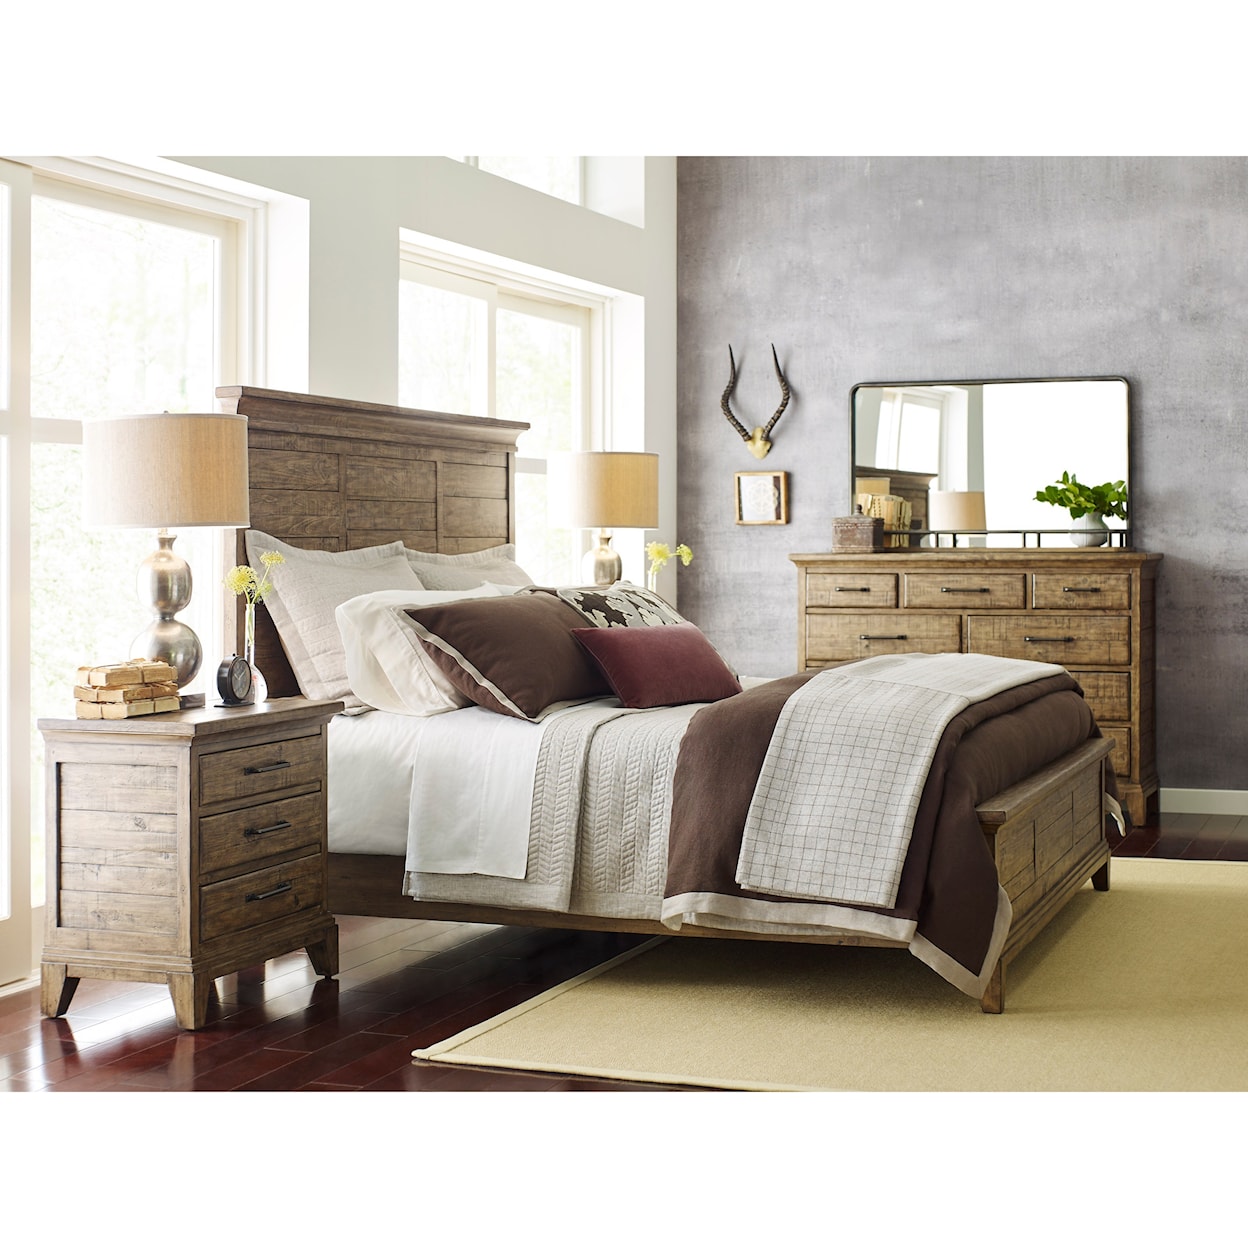 Kincaid Furniture Plank Road Queen Bedroom Group